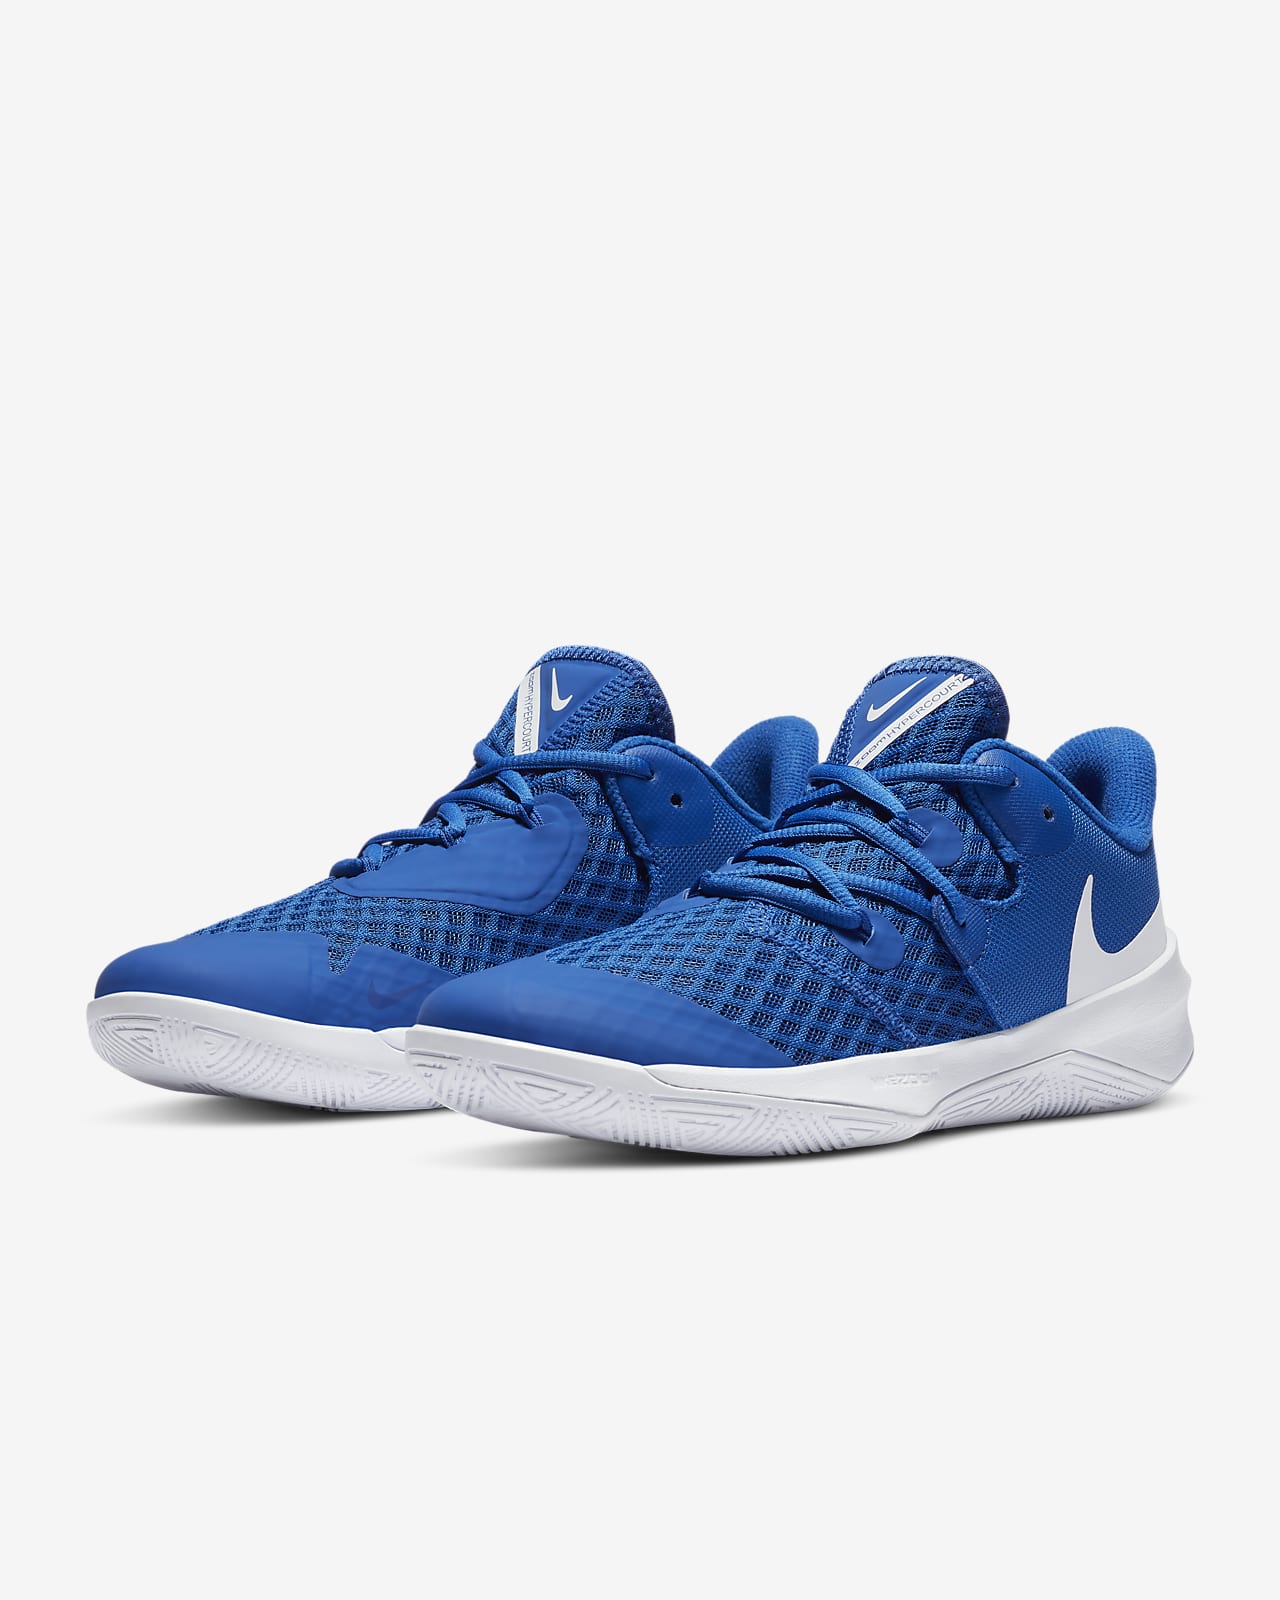 nike women's court hyperspeed volleyball shoes